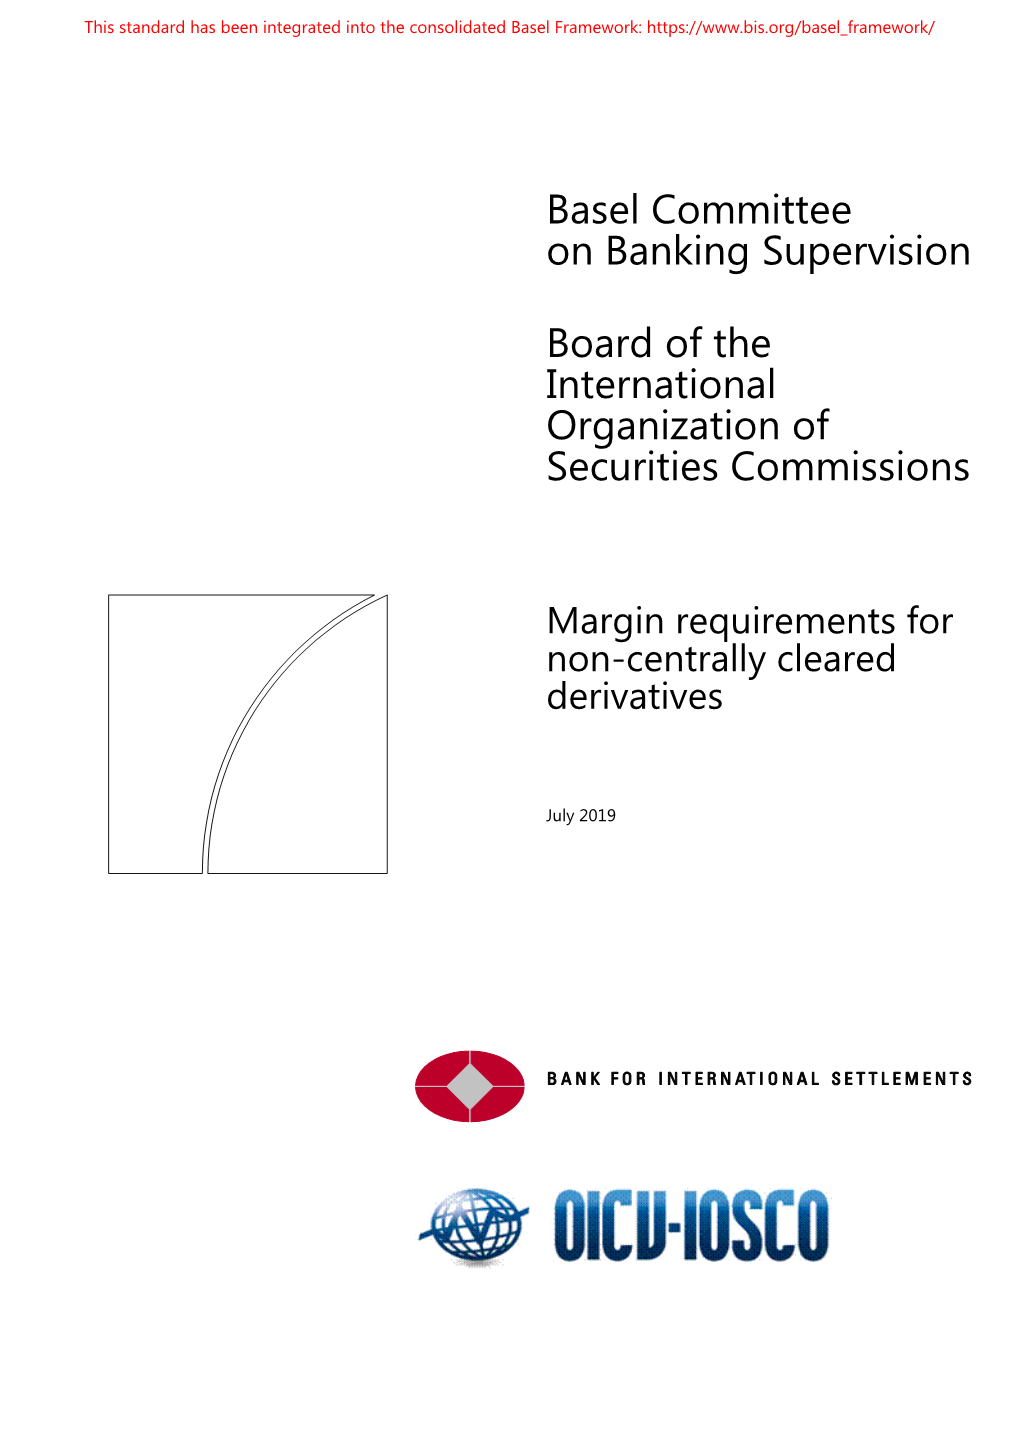 Margin Requirements for Non-Centrally Cleared Derivatives